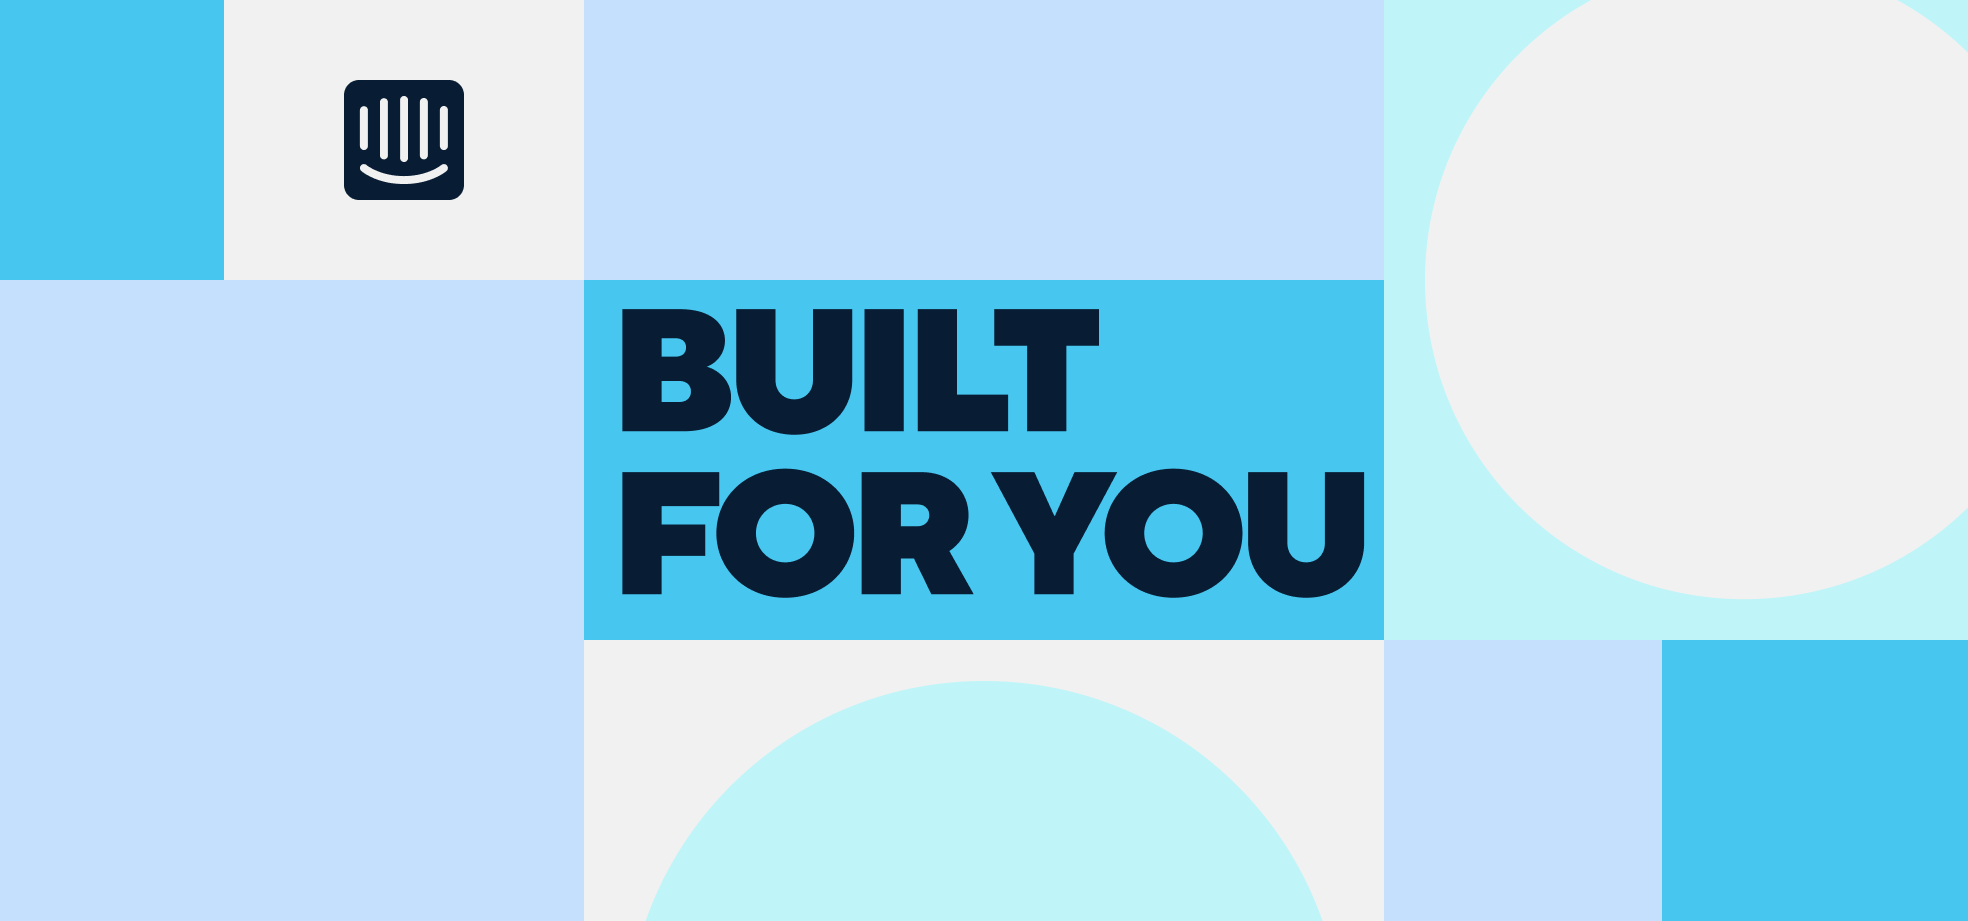 Built for you: Increased customizability, workspace security upgrades, custom objects in the Inbox, and more